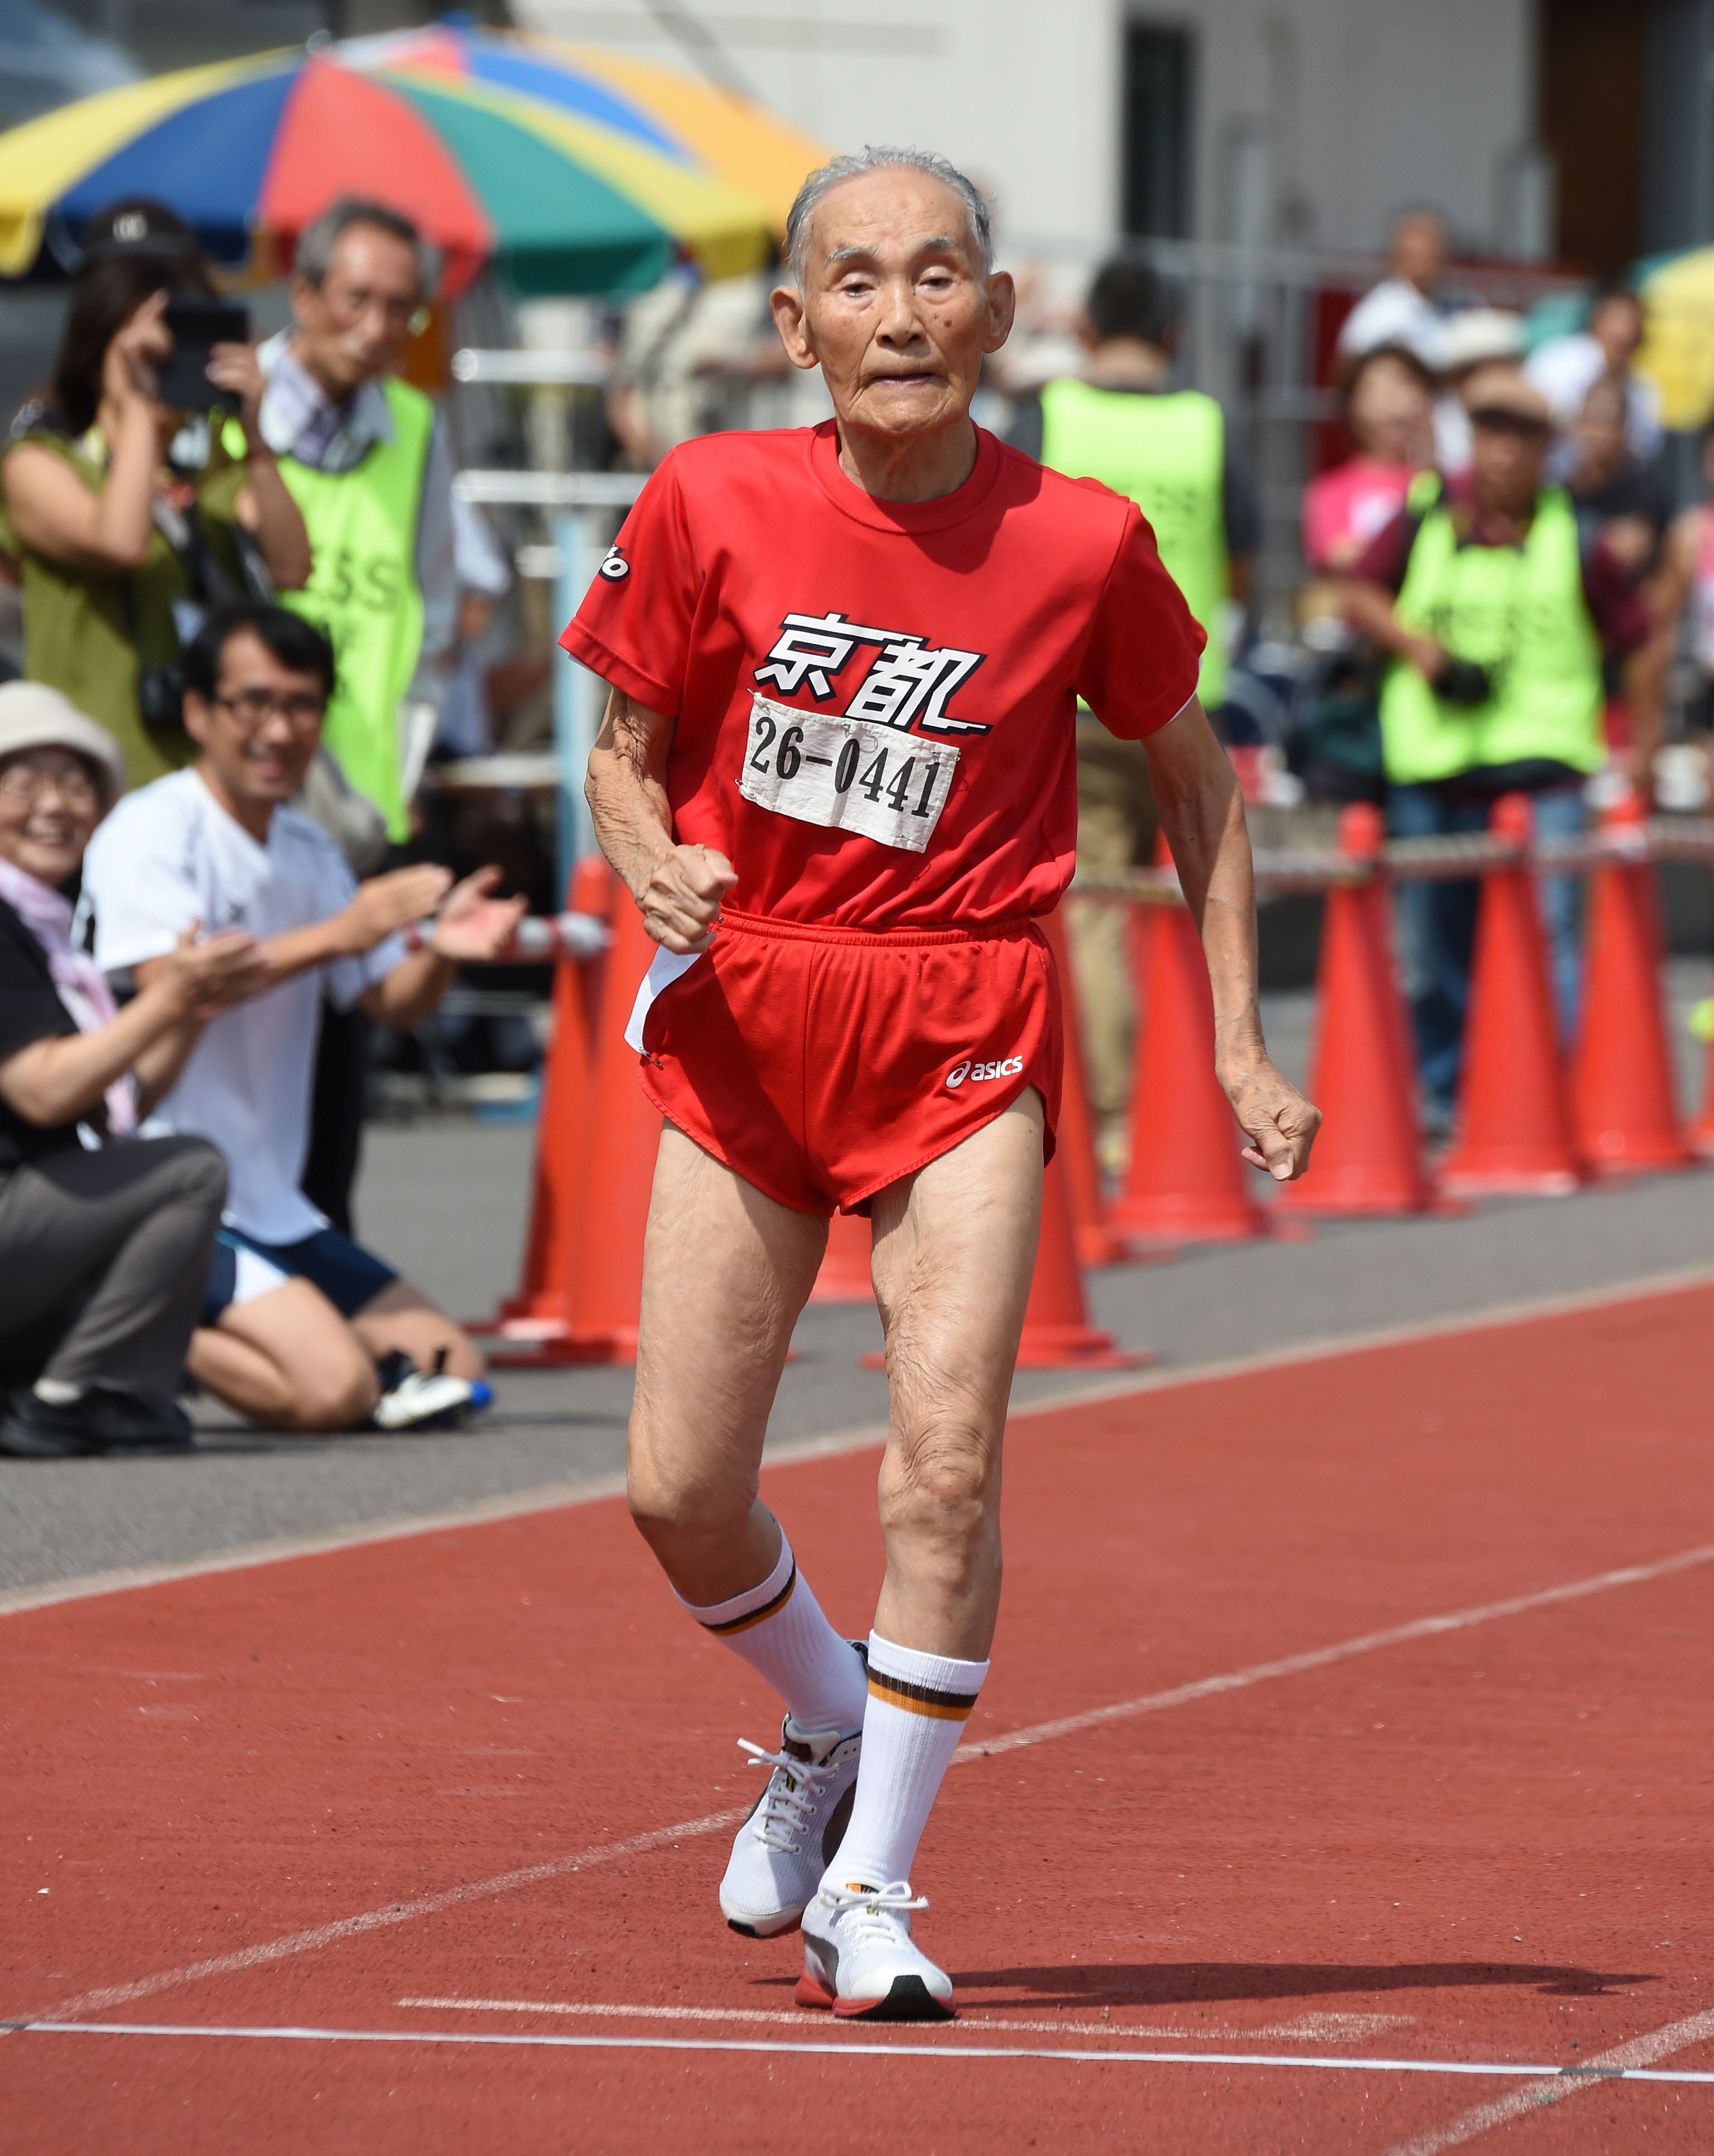 Hidekichi Miyazaki, 105, crosses the finishing line after running with other competitors over eighty years of age during a 100-metre-dash in the Kyoto Masters Autumn Competiton in Kyoto, western Japan, on September 23, 2015. Miyazaki was authorised as the oldest sprinter who competed in a 100-metre-dash by the Guinness World Records.      AFP PHOTO / Toru YAMANAKA